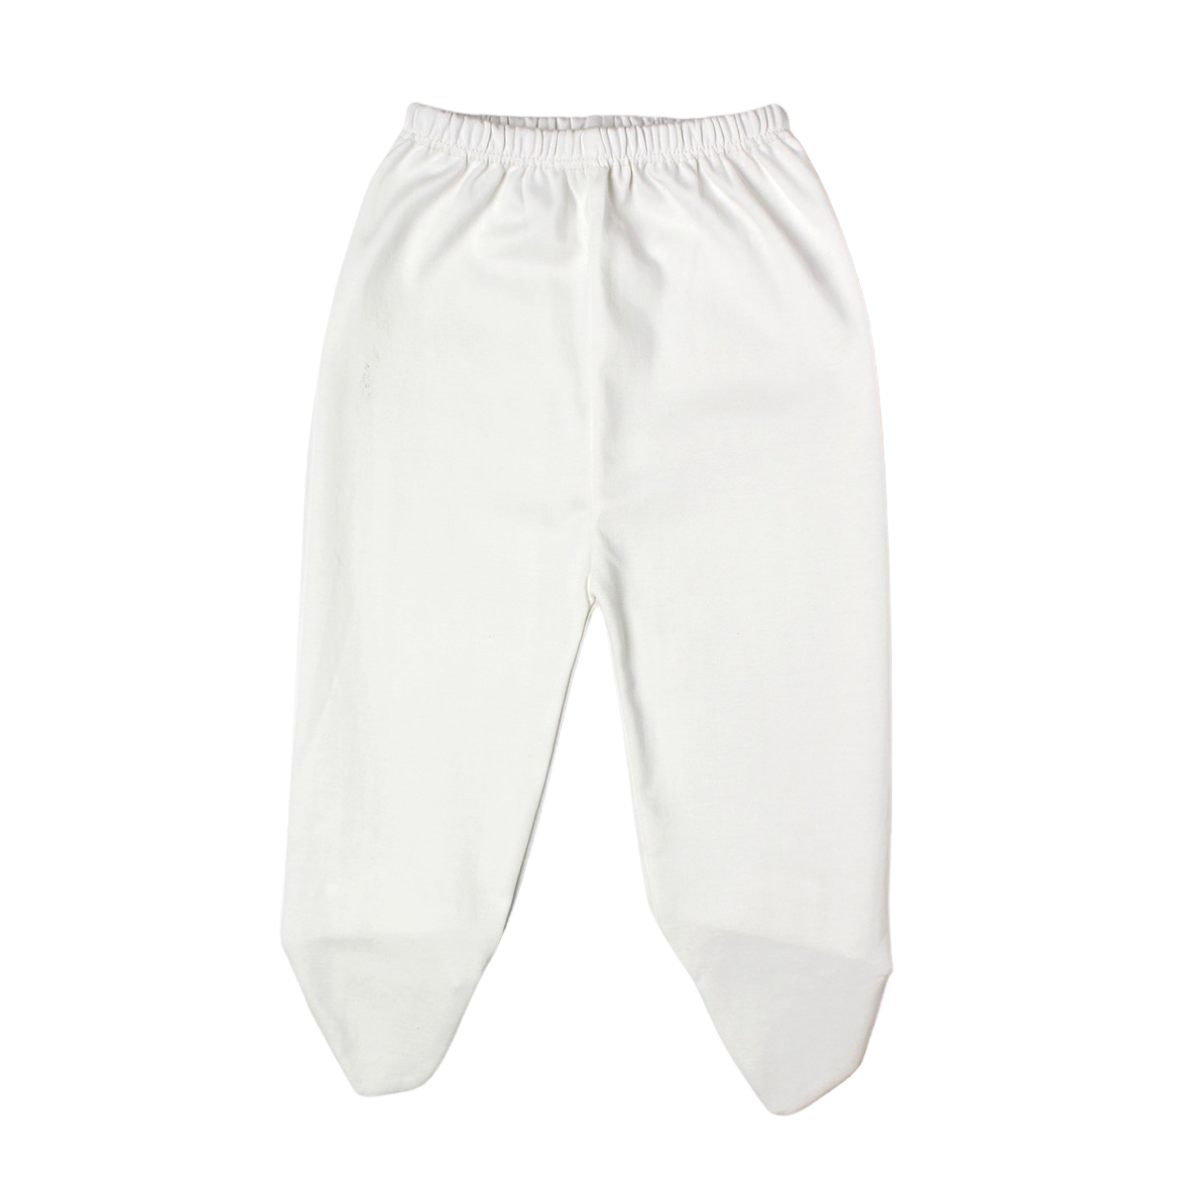 Off White - Baby Footie Pants in Pima Cotton